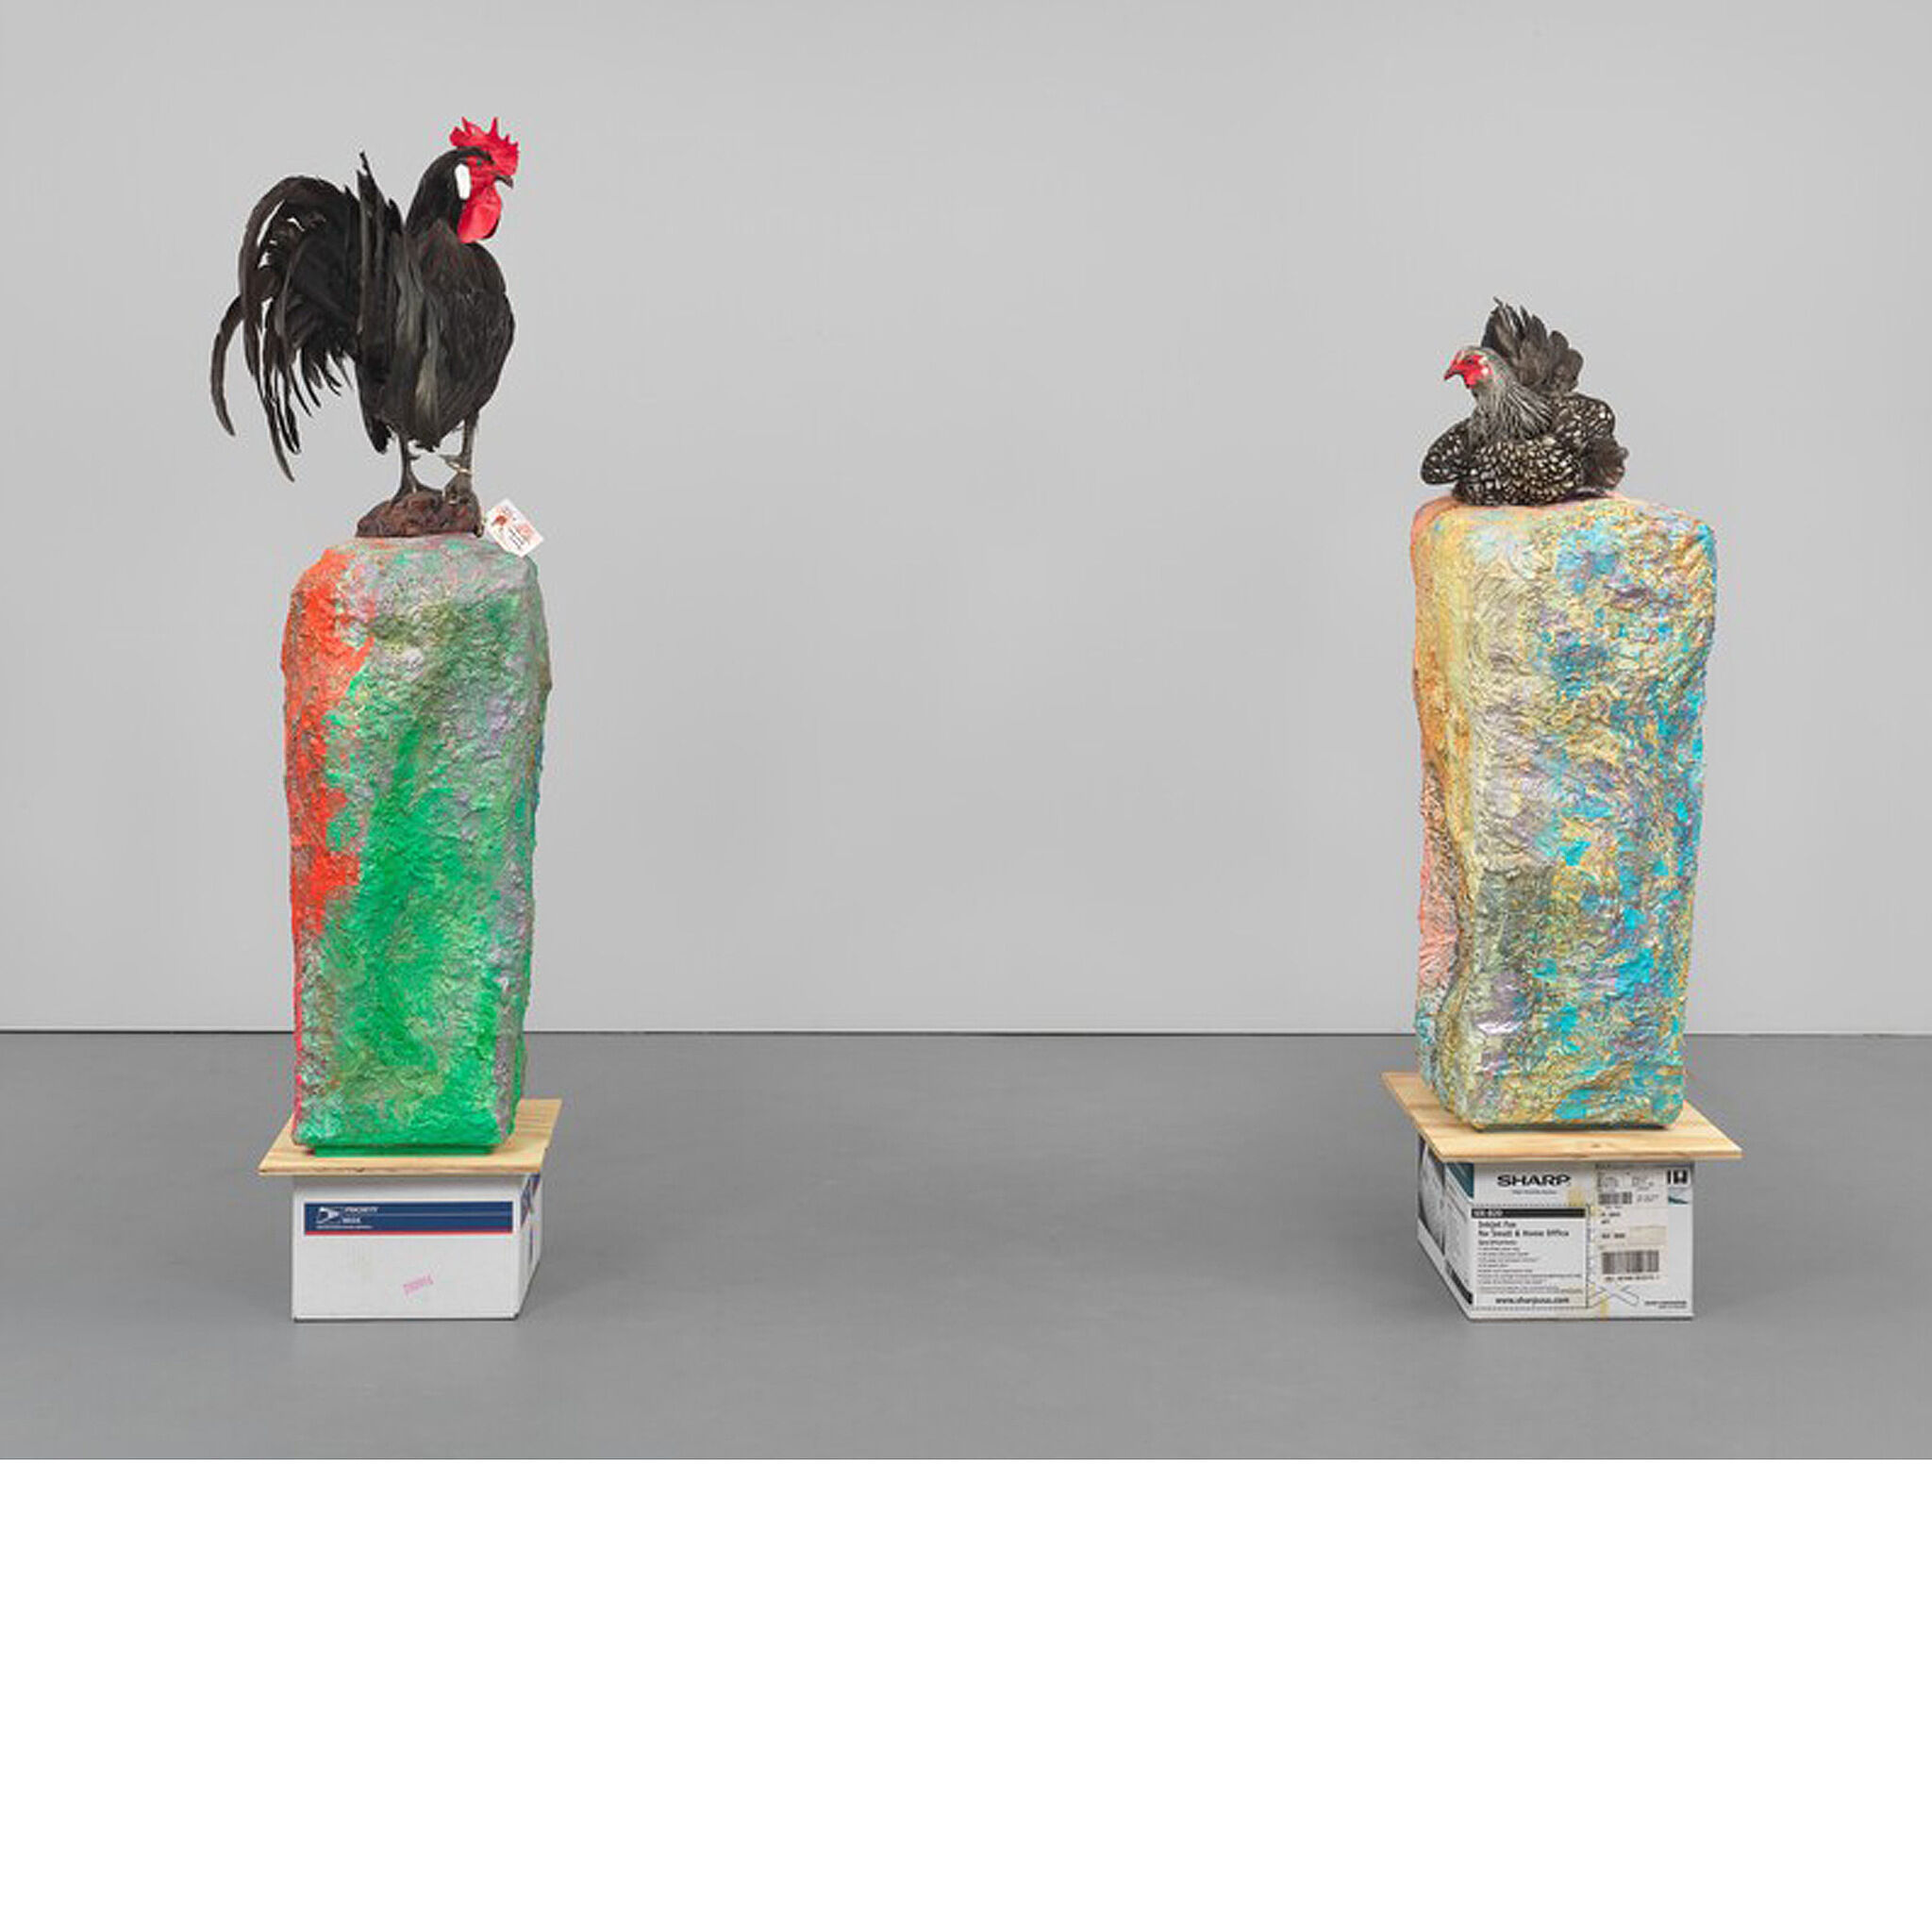 Rooster and chicken statues on top of colorful tablets.